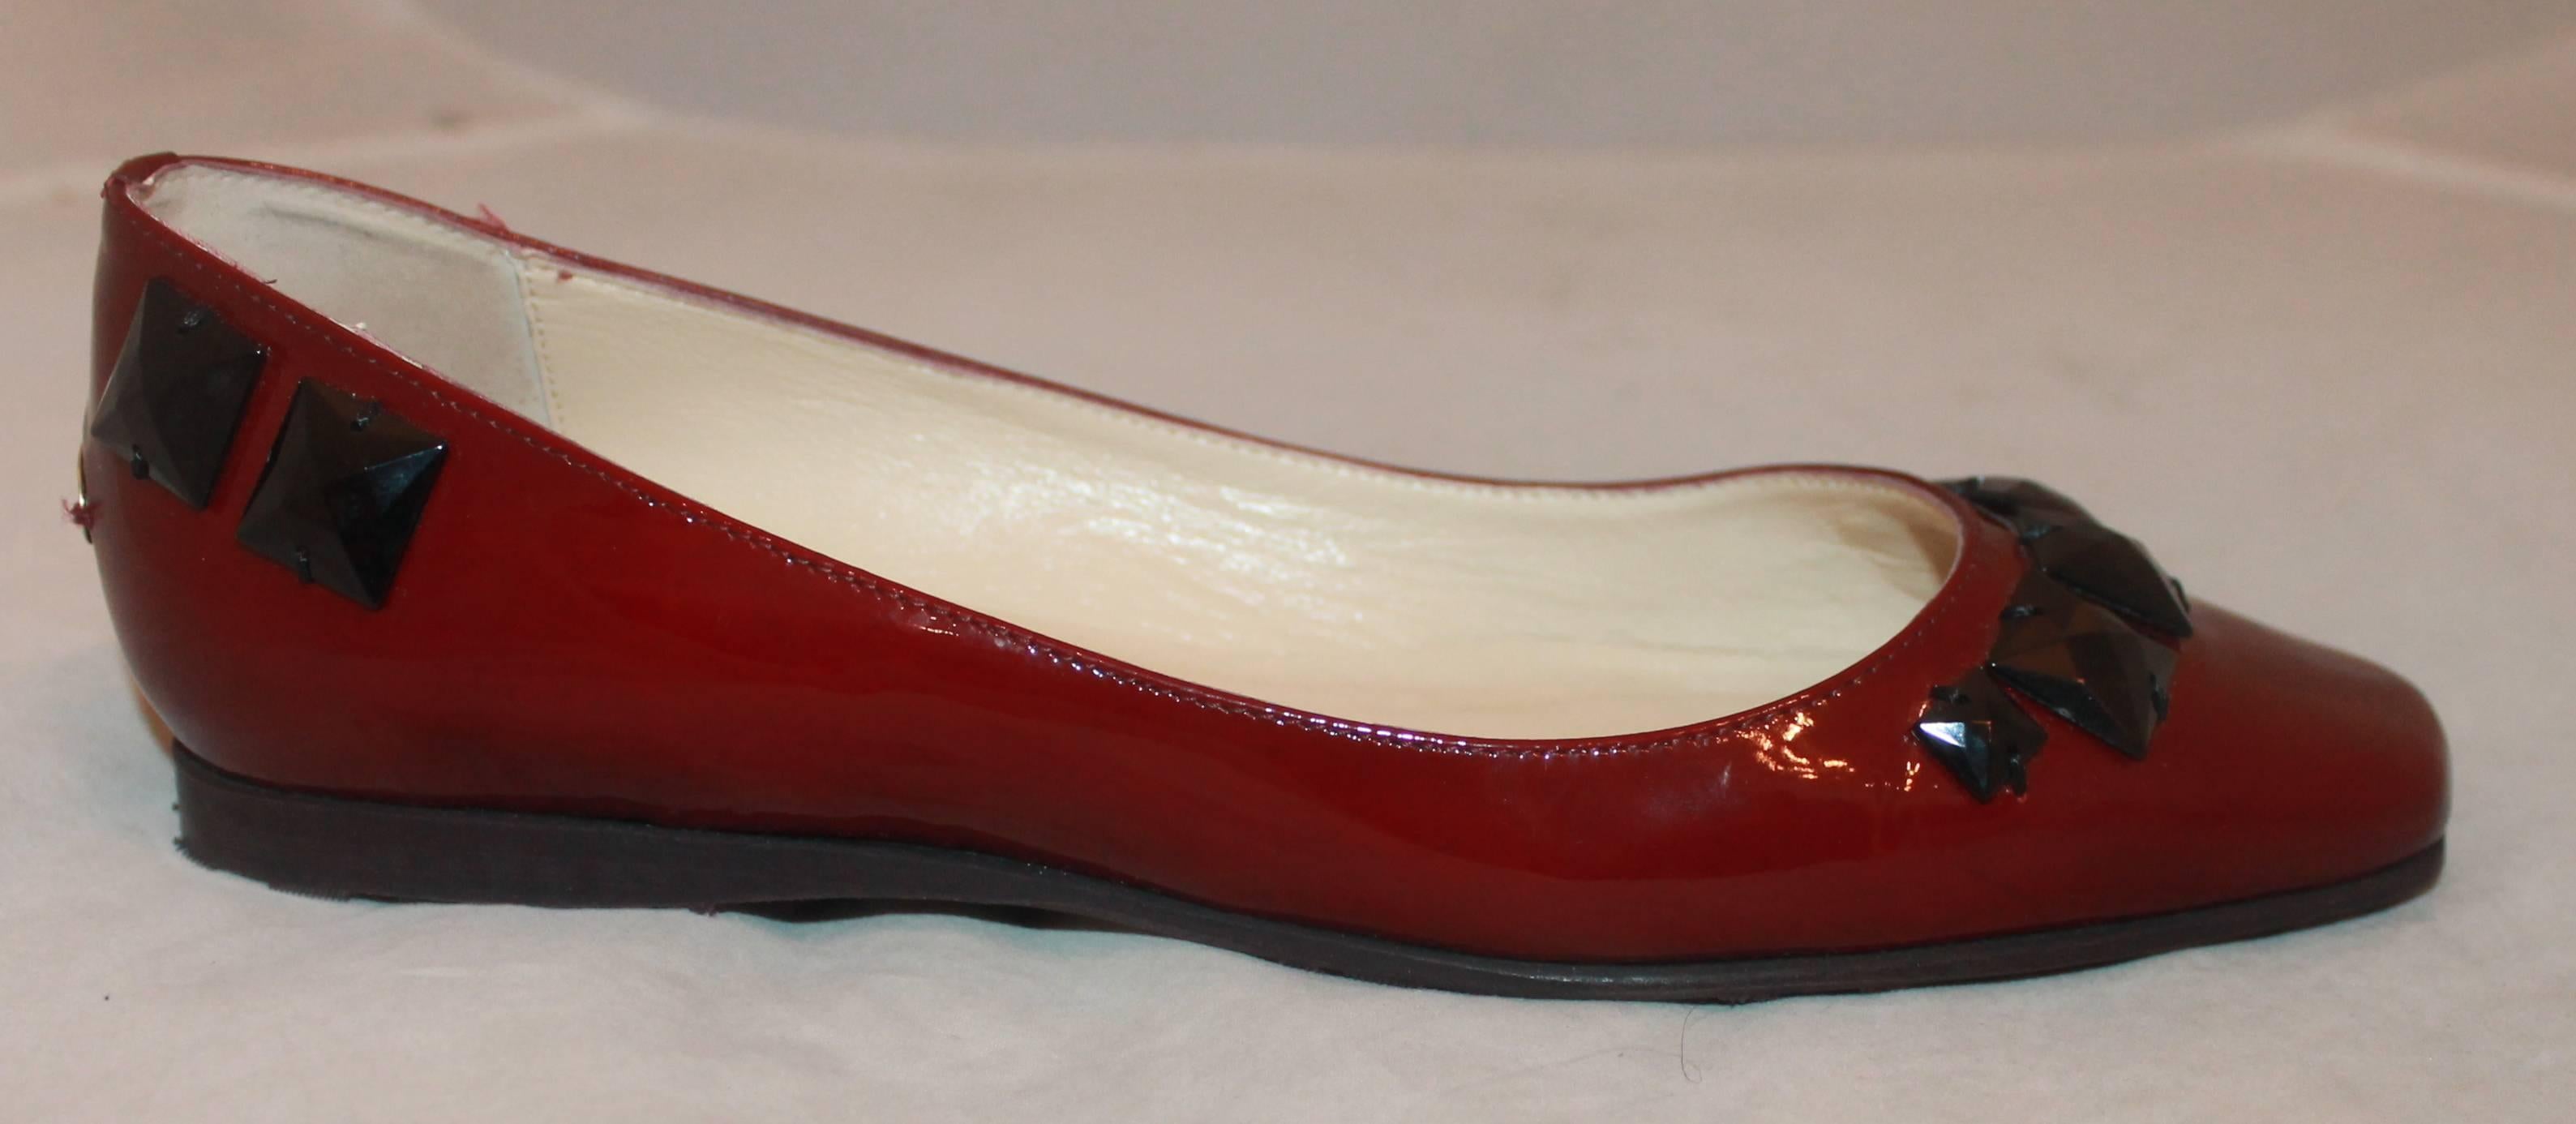 Jimmy Choo Red Patent Flats w/ Black Stone Beads - 37.  These lovely flats are in excellent condition with little or no wear to the sole, they were possibly never worn.  They feature a beautiful red patent exterior, black stone beads, a square toe,